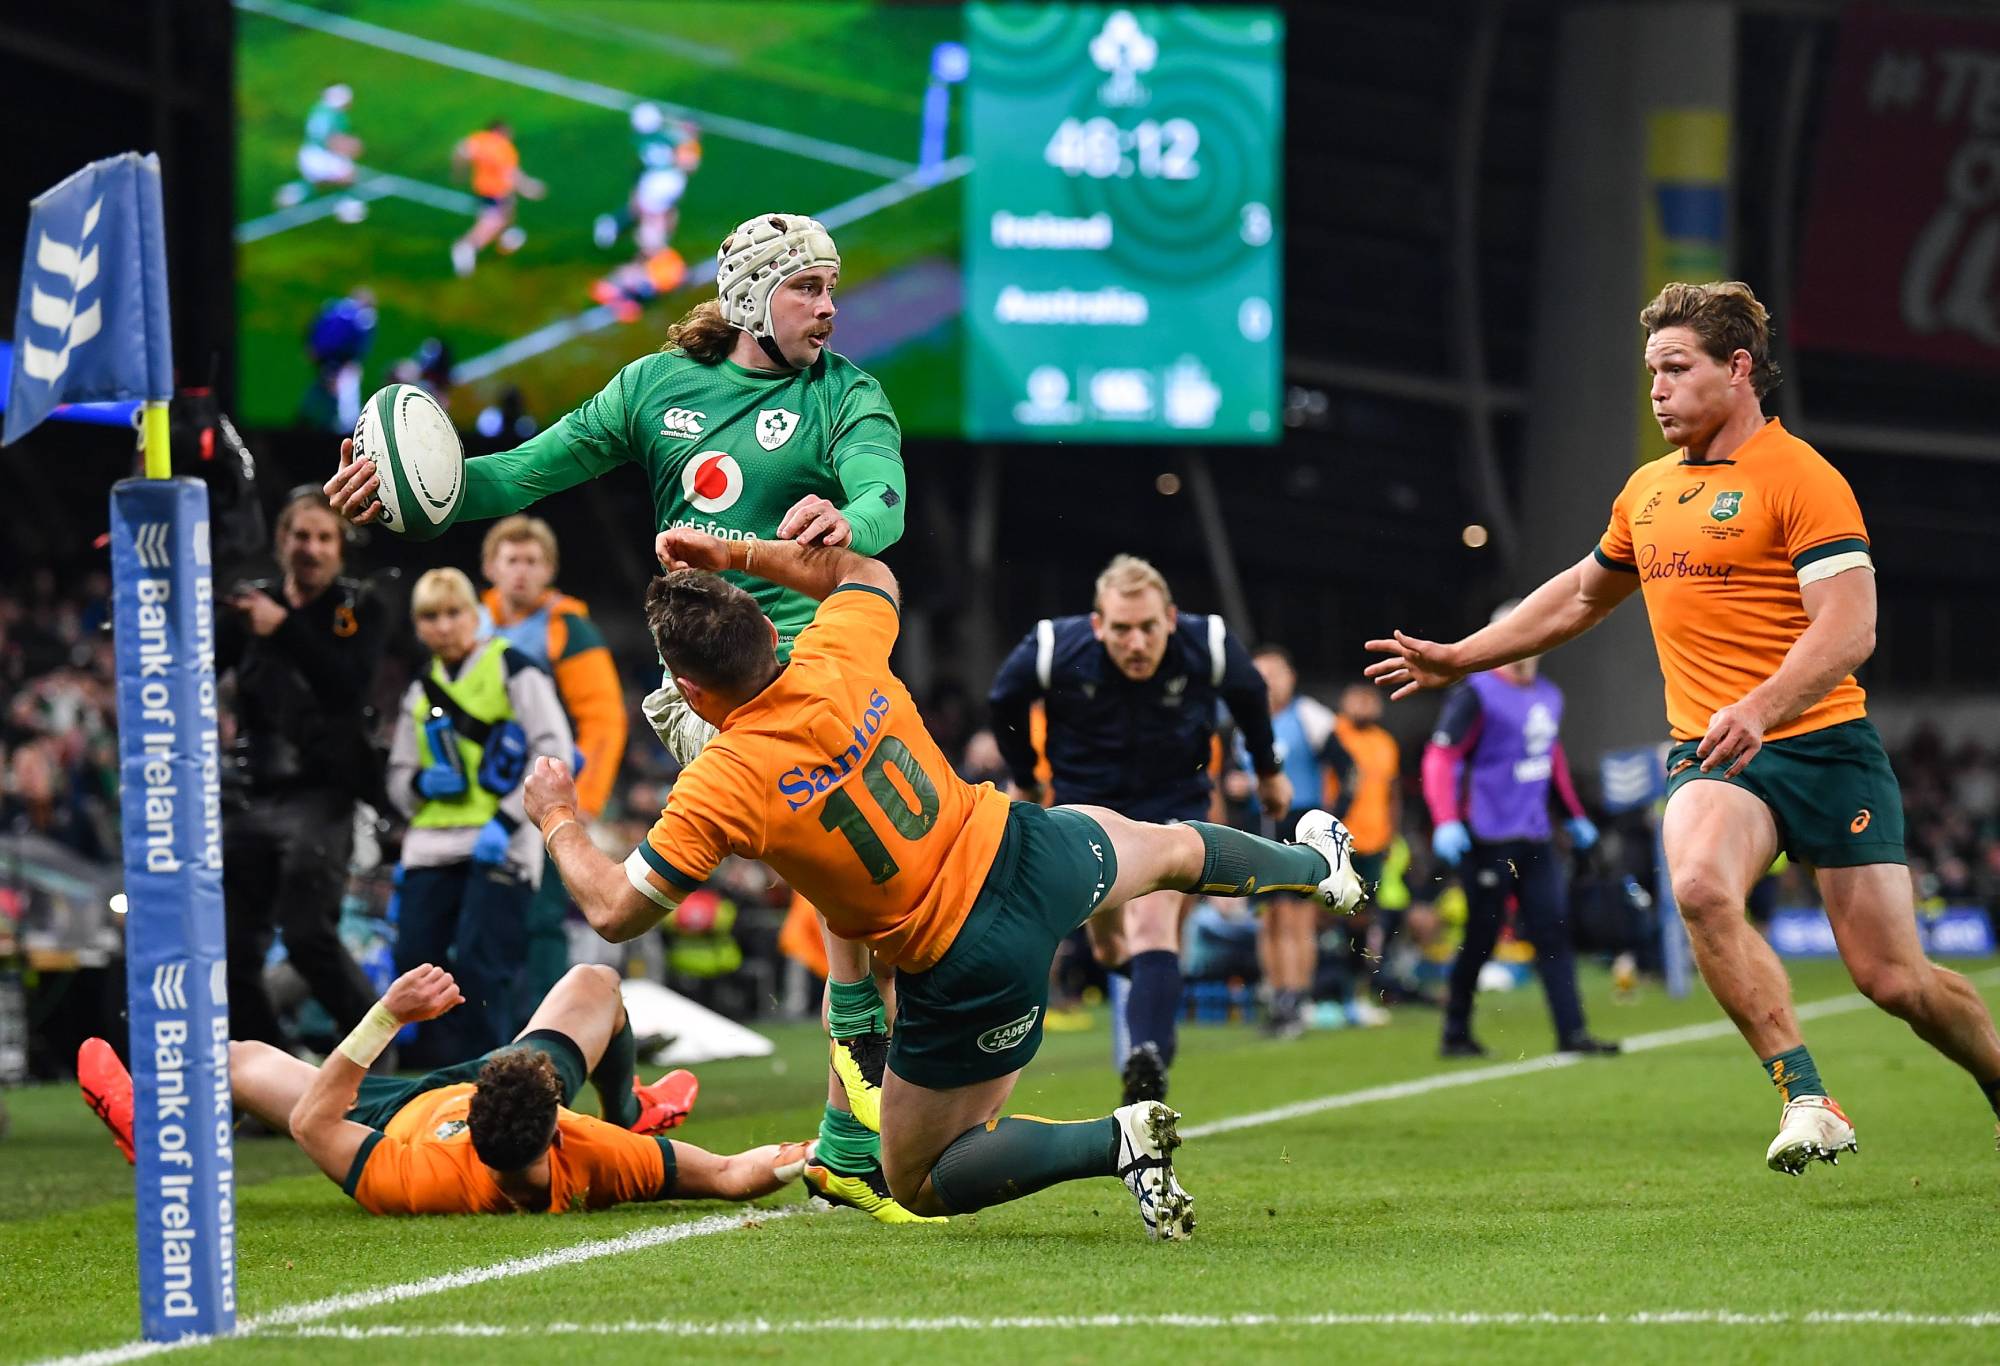 Mack Hansen of Ireland attempts to keep the ball in play during the Bank of Ireland Nations Series match between Ireland and Australia at the Aviva Stadium in Dublin. (Photo By David Fitzgerald/Sportsfile via Getty Images)